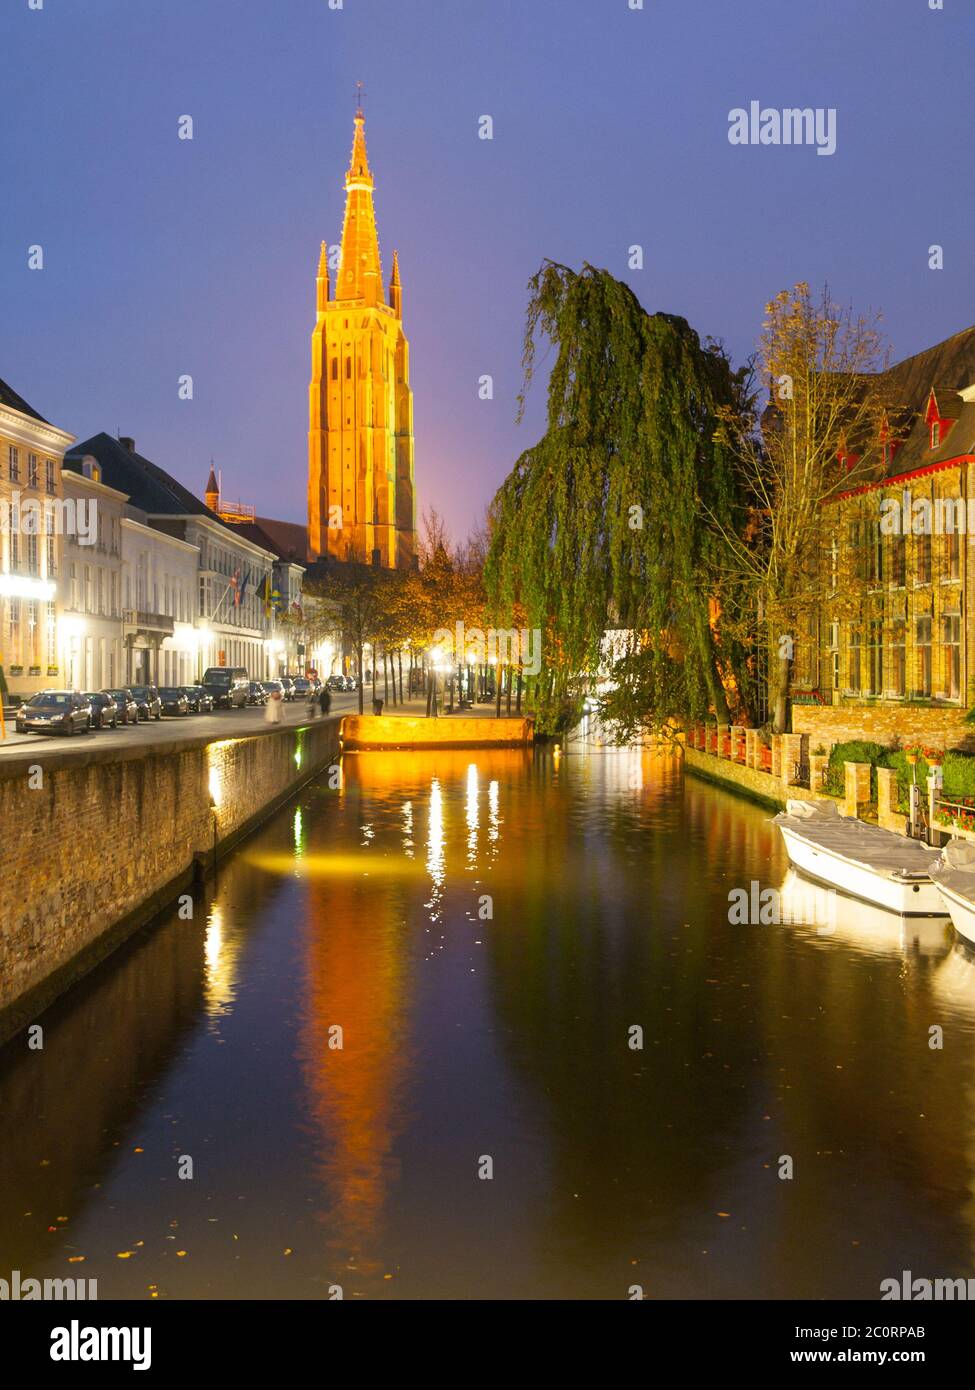 Church of Our Lady and water canal by night, Bruges, Belgium. Stock Photo